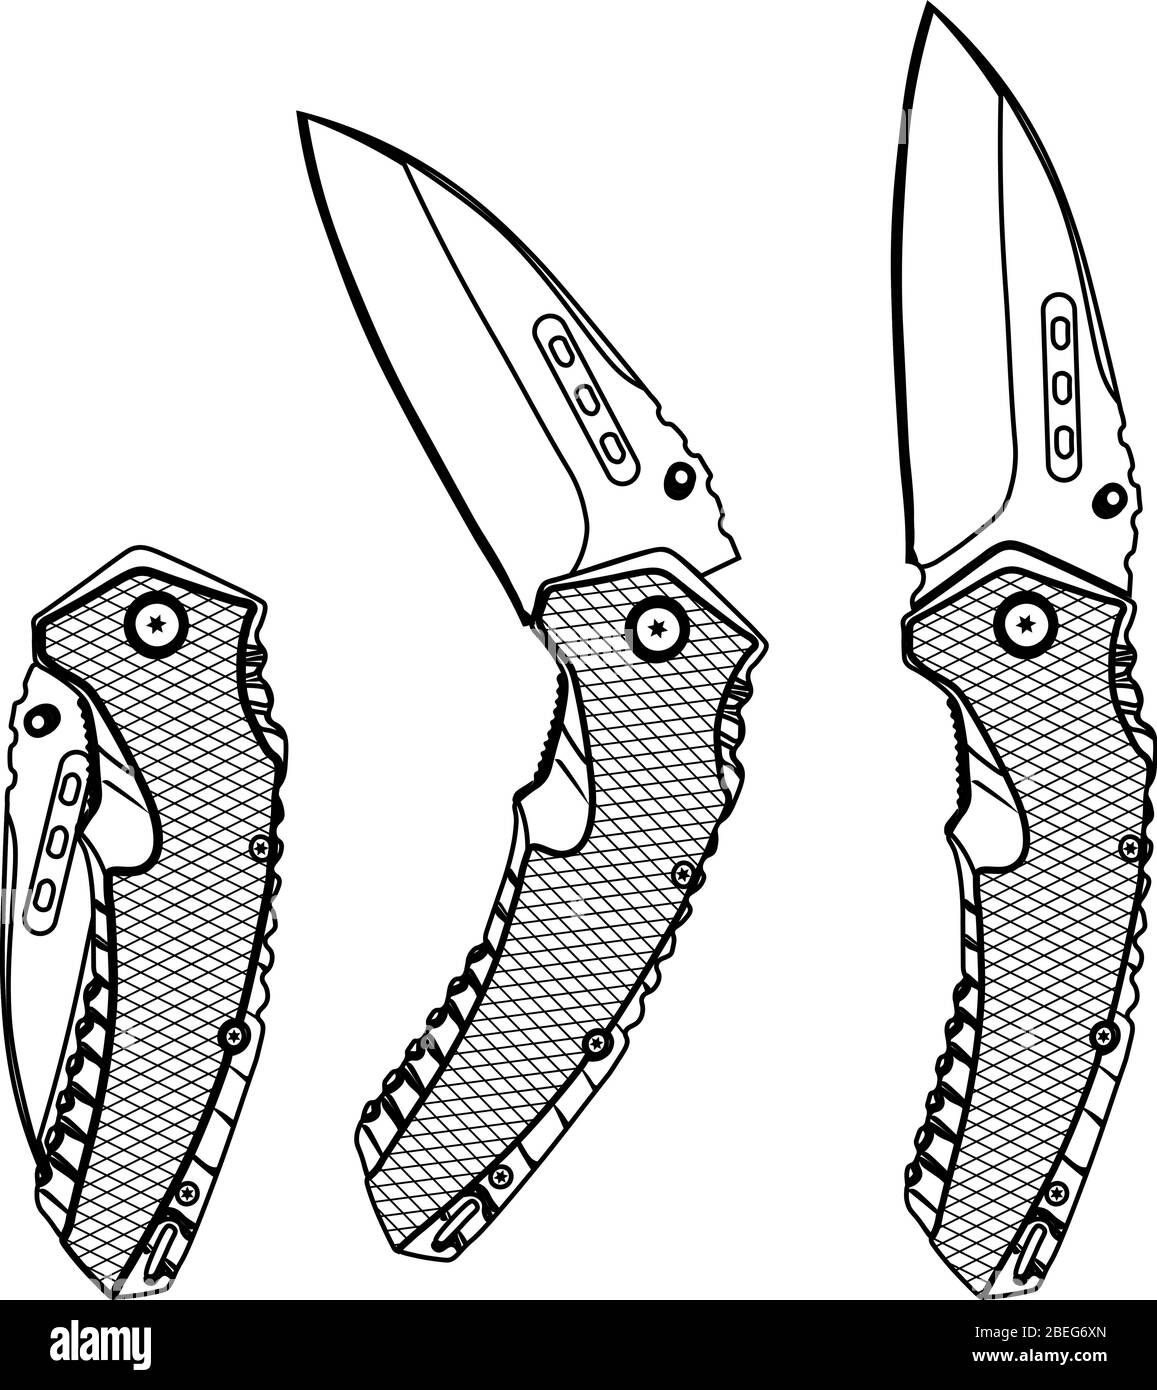 Isolated contour illustration of folding knife in three different positions Stock Vector